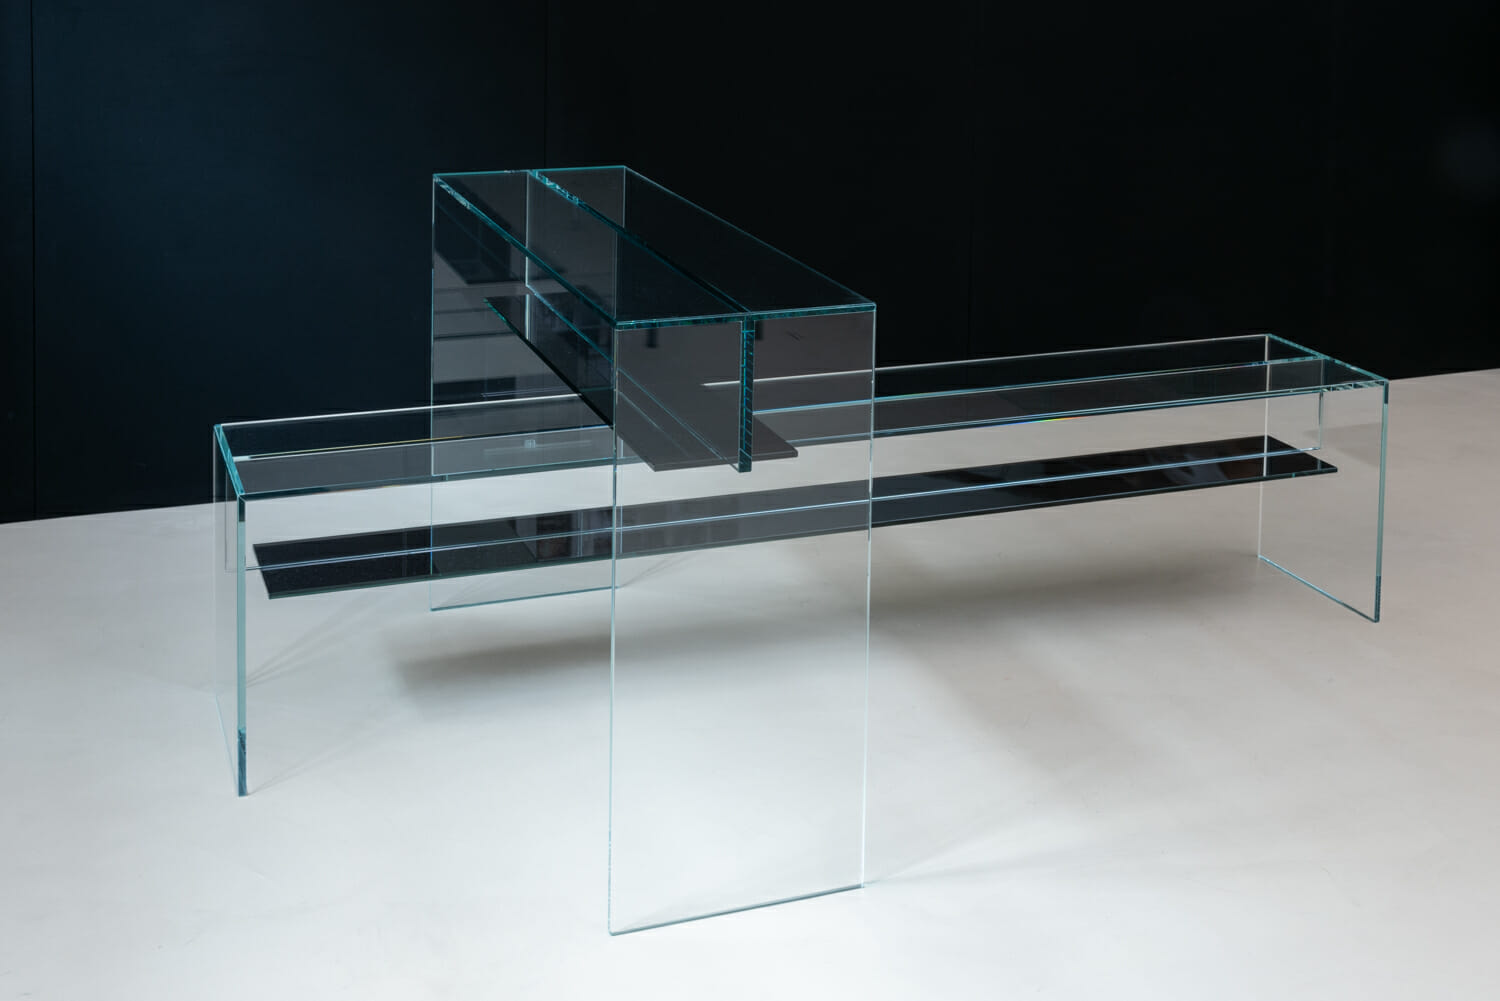 High End Glass Furniture Company: How to Spot the Differences in the